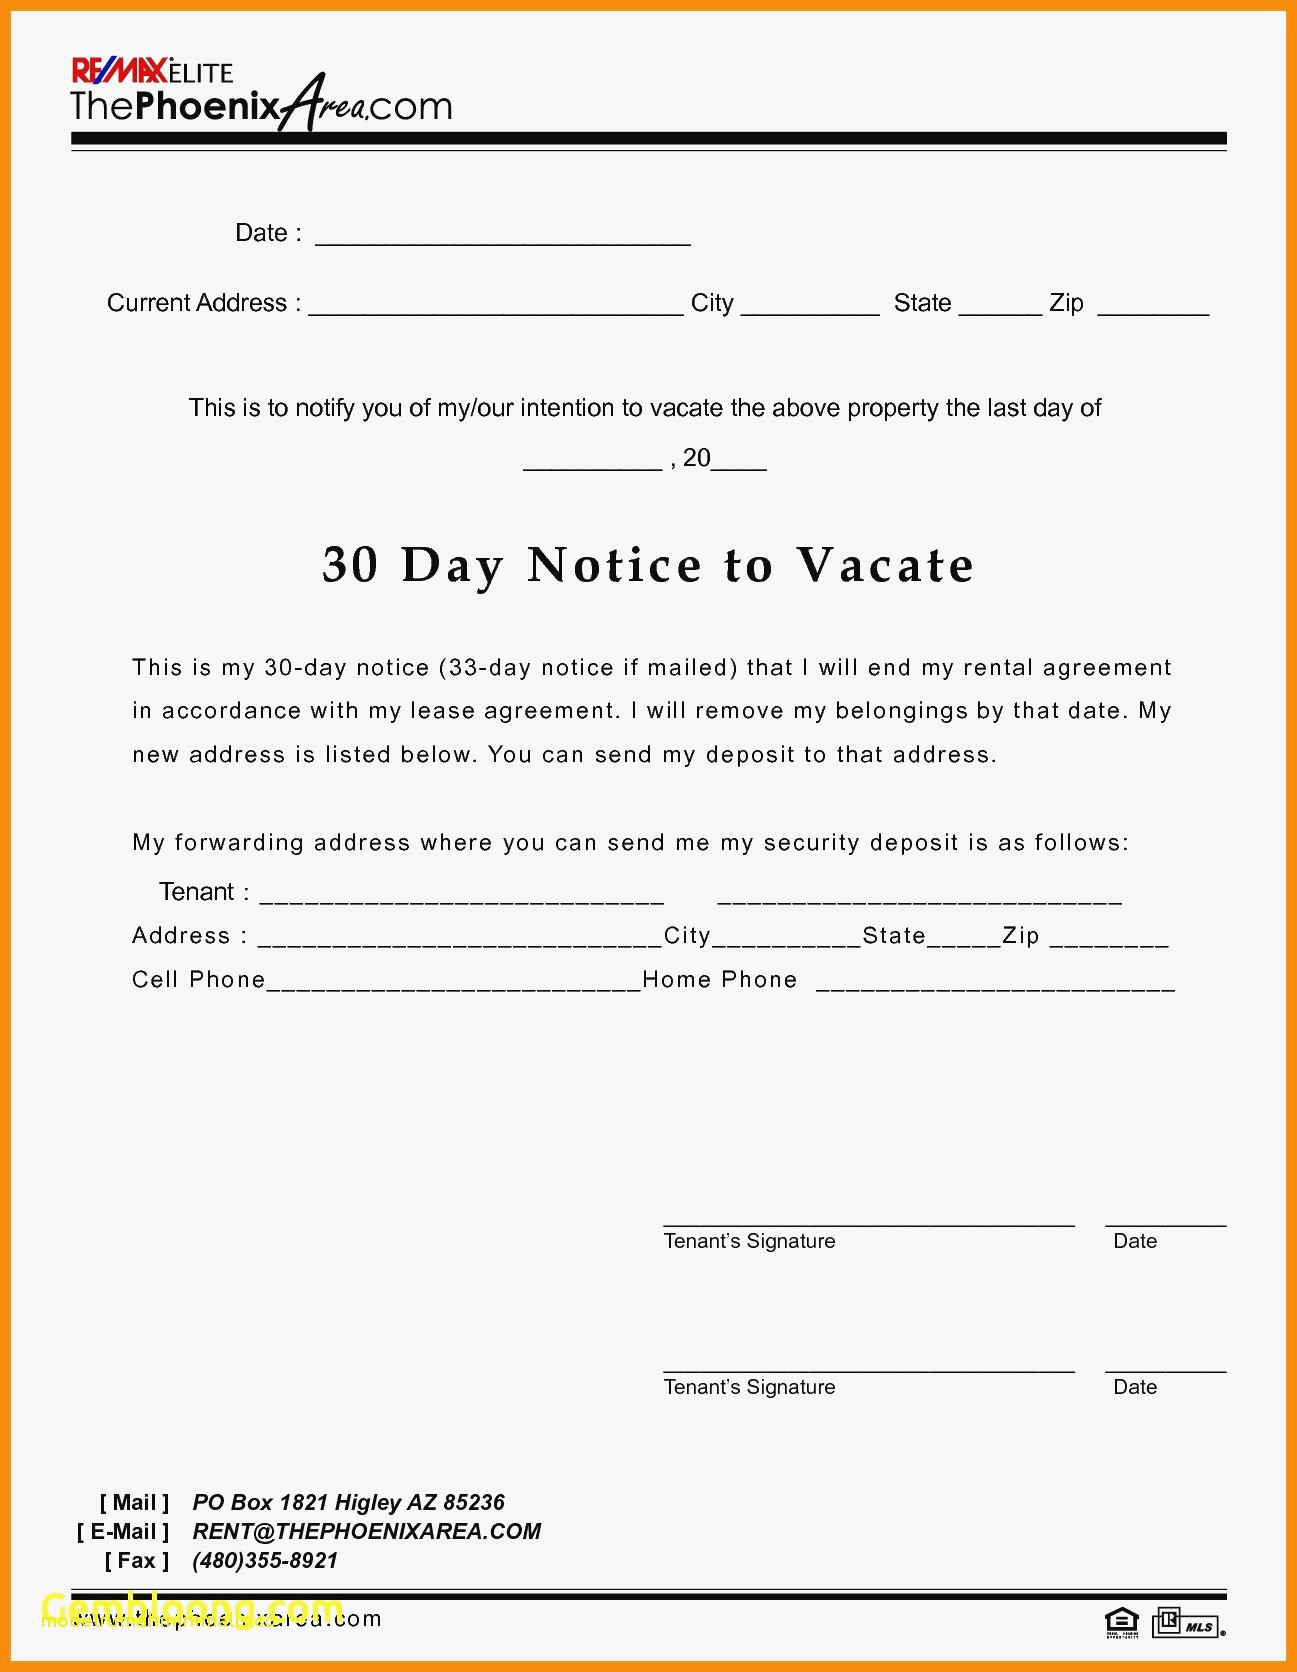 30 Day Eviction Letter Template - 14 Day Eviction Notice Template Unique 30 Day Notice to Landlord